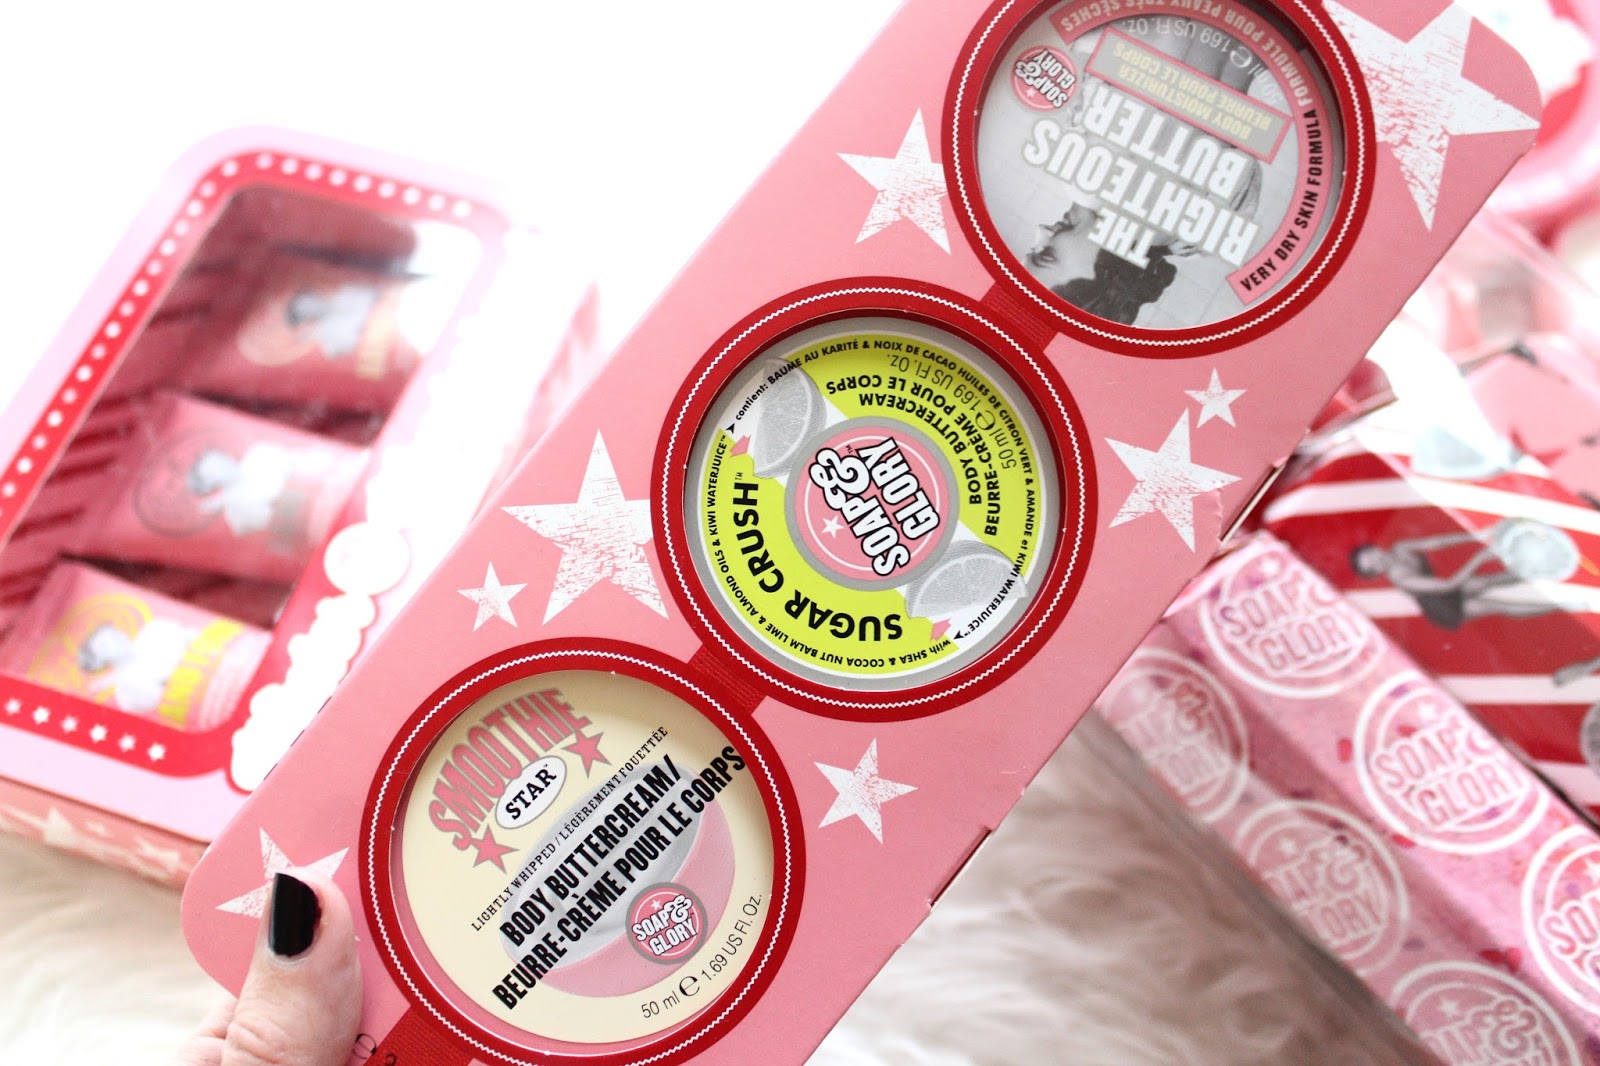 Soap & Glory Christmas Gifts 